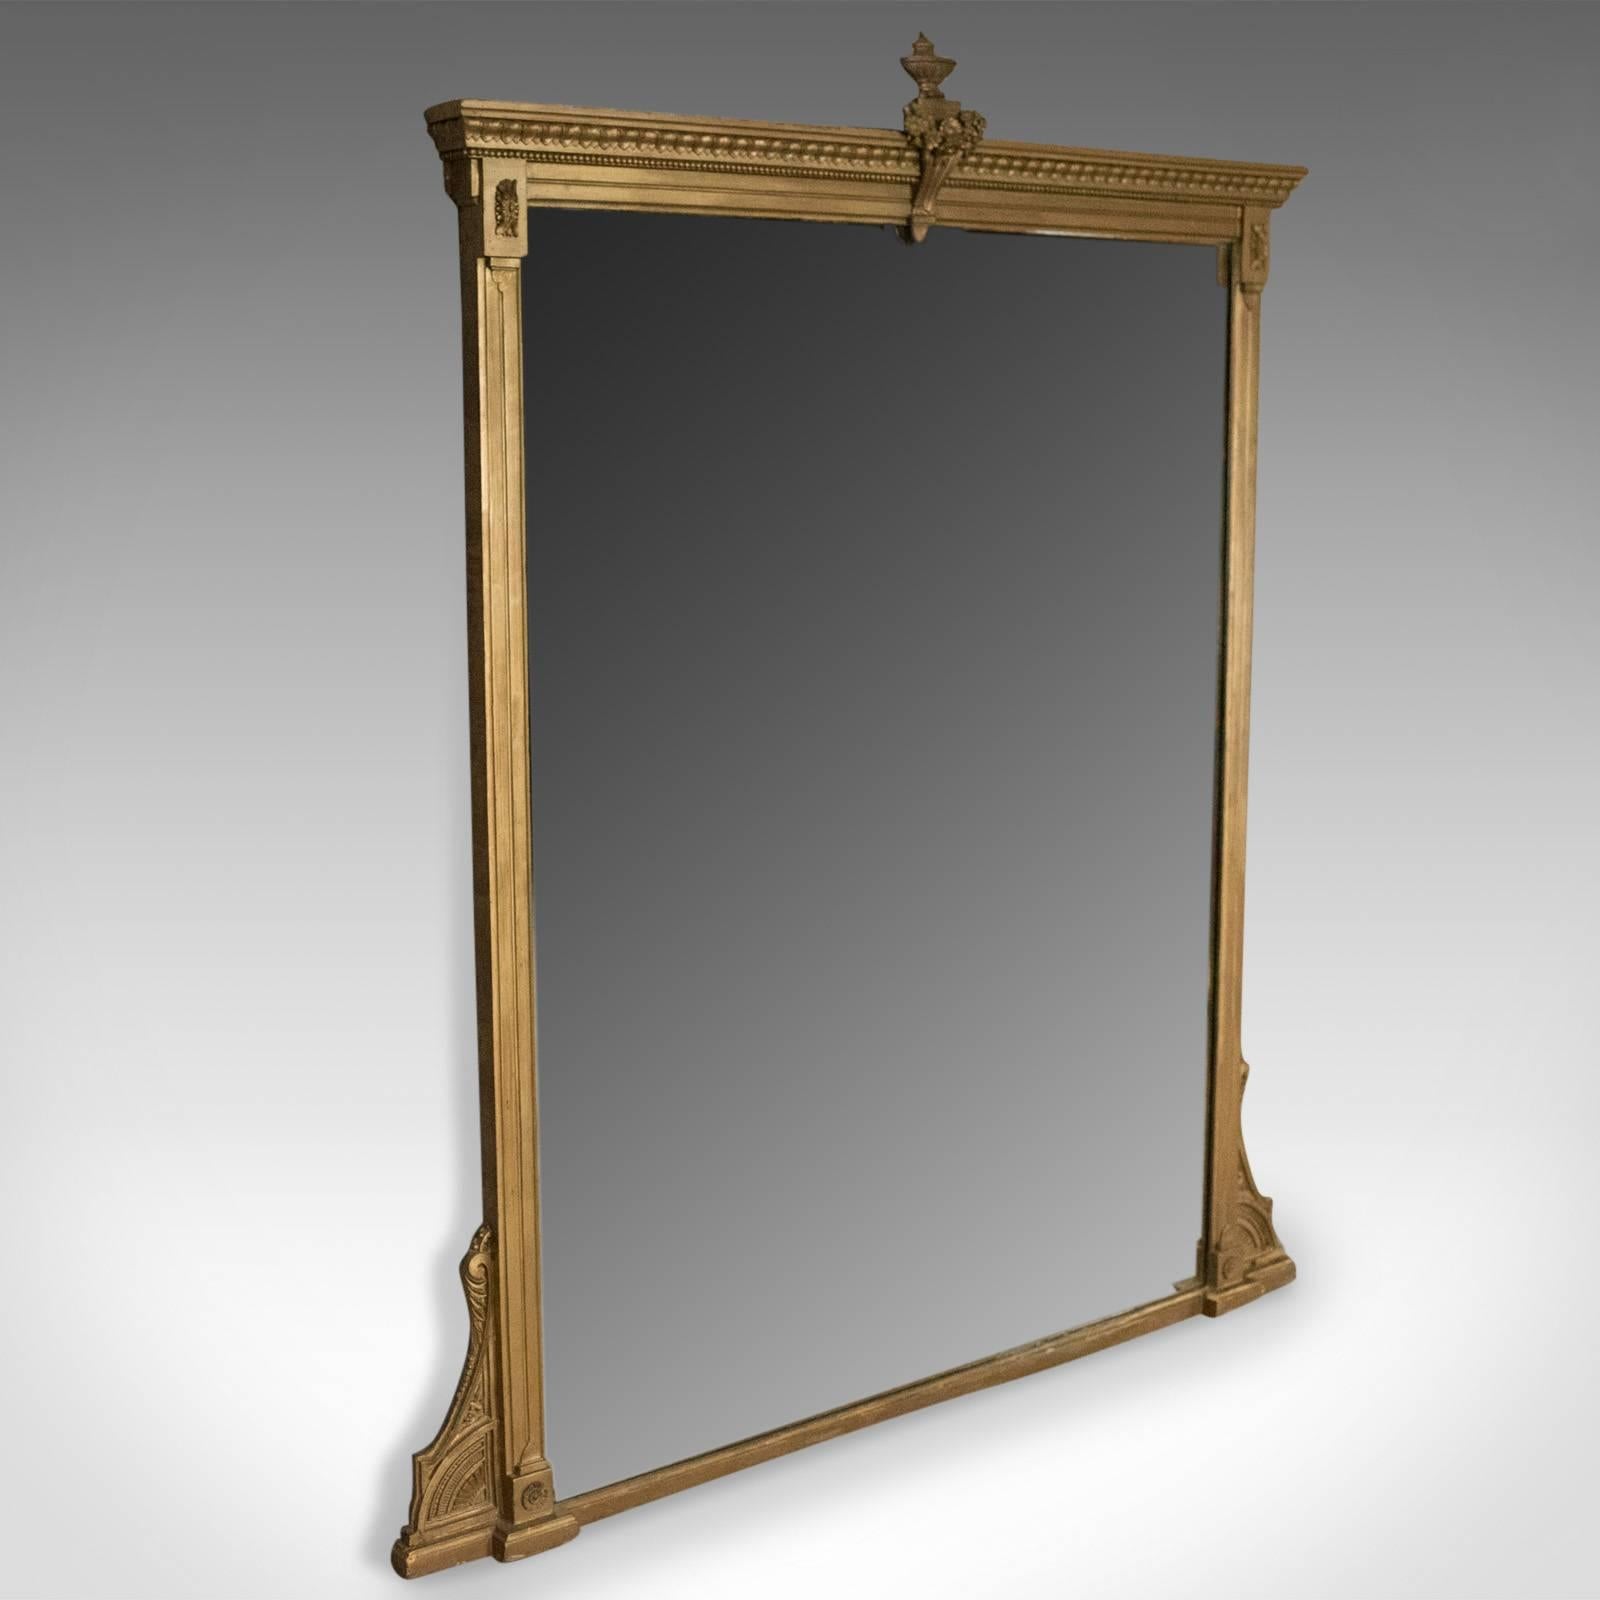 This is an antique overmantel mirror. A Victorian classical revival wall mirror from the 19th century, circa 1880.

In good proportion with a quality giltwood finish
Displaying modest classical revival styling
Later mirror plate in very good